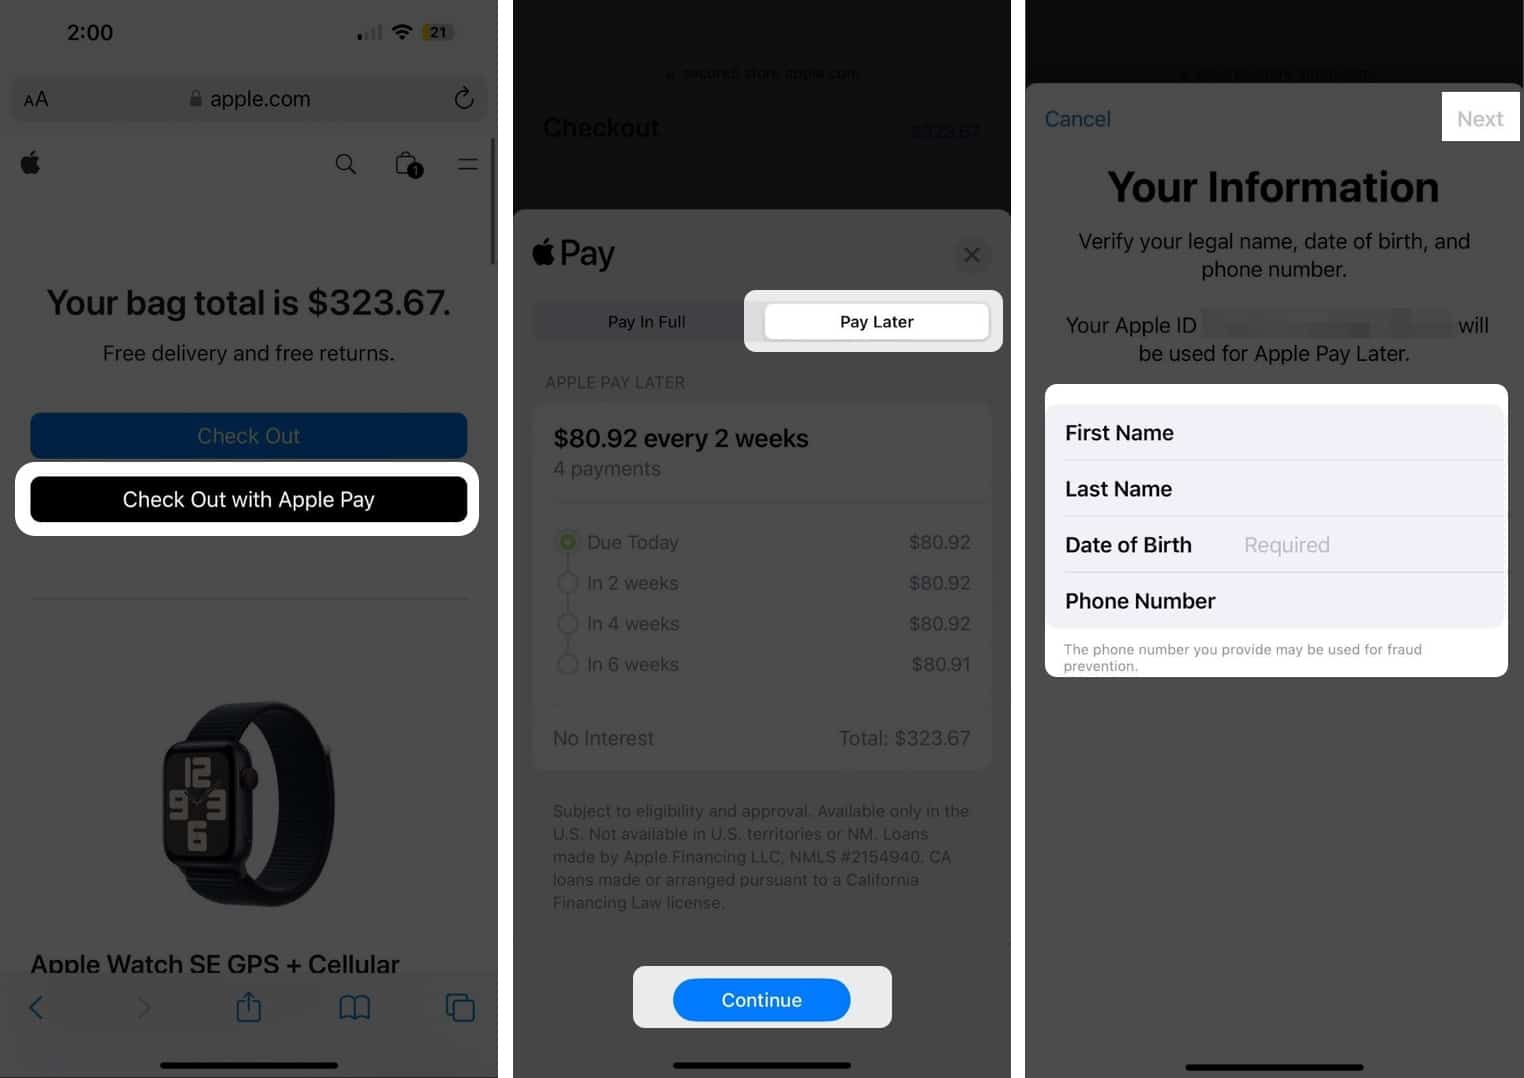 Select Apple Pay Later directly at checkout